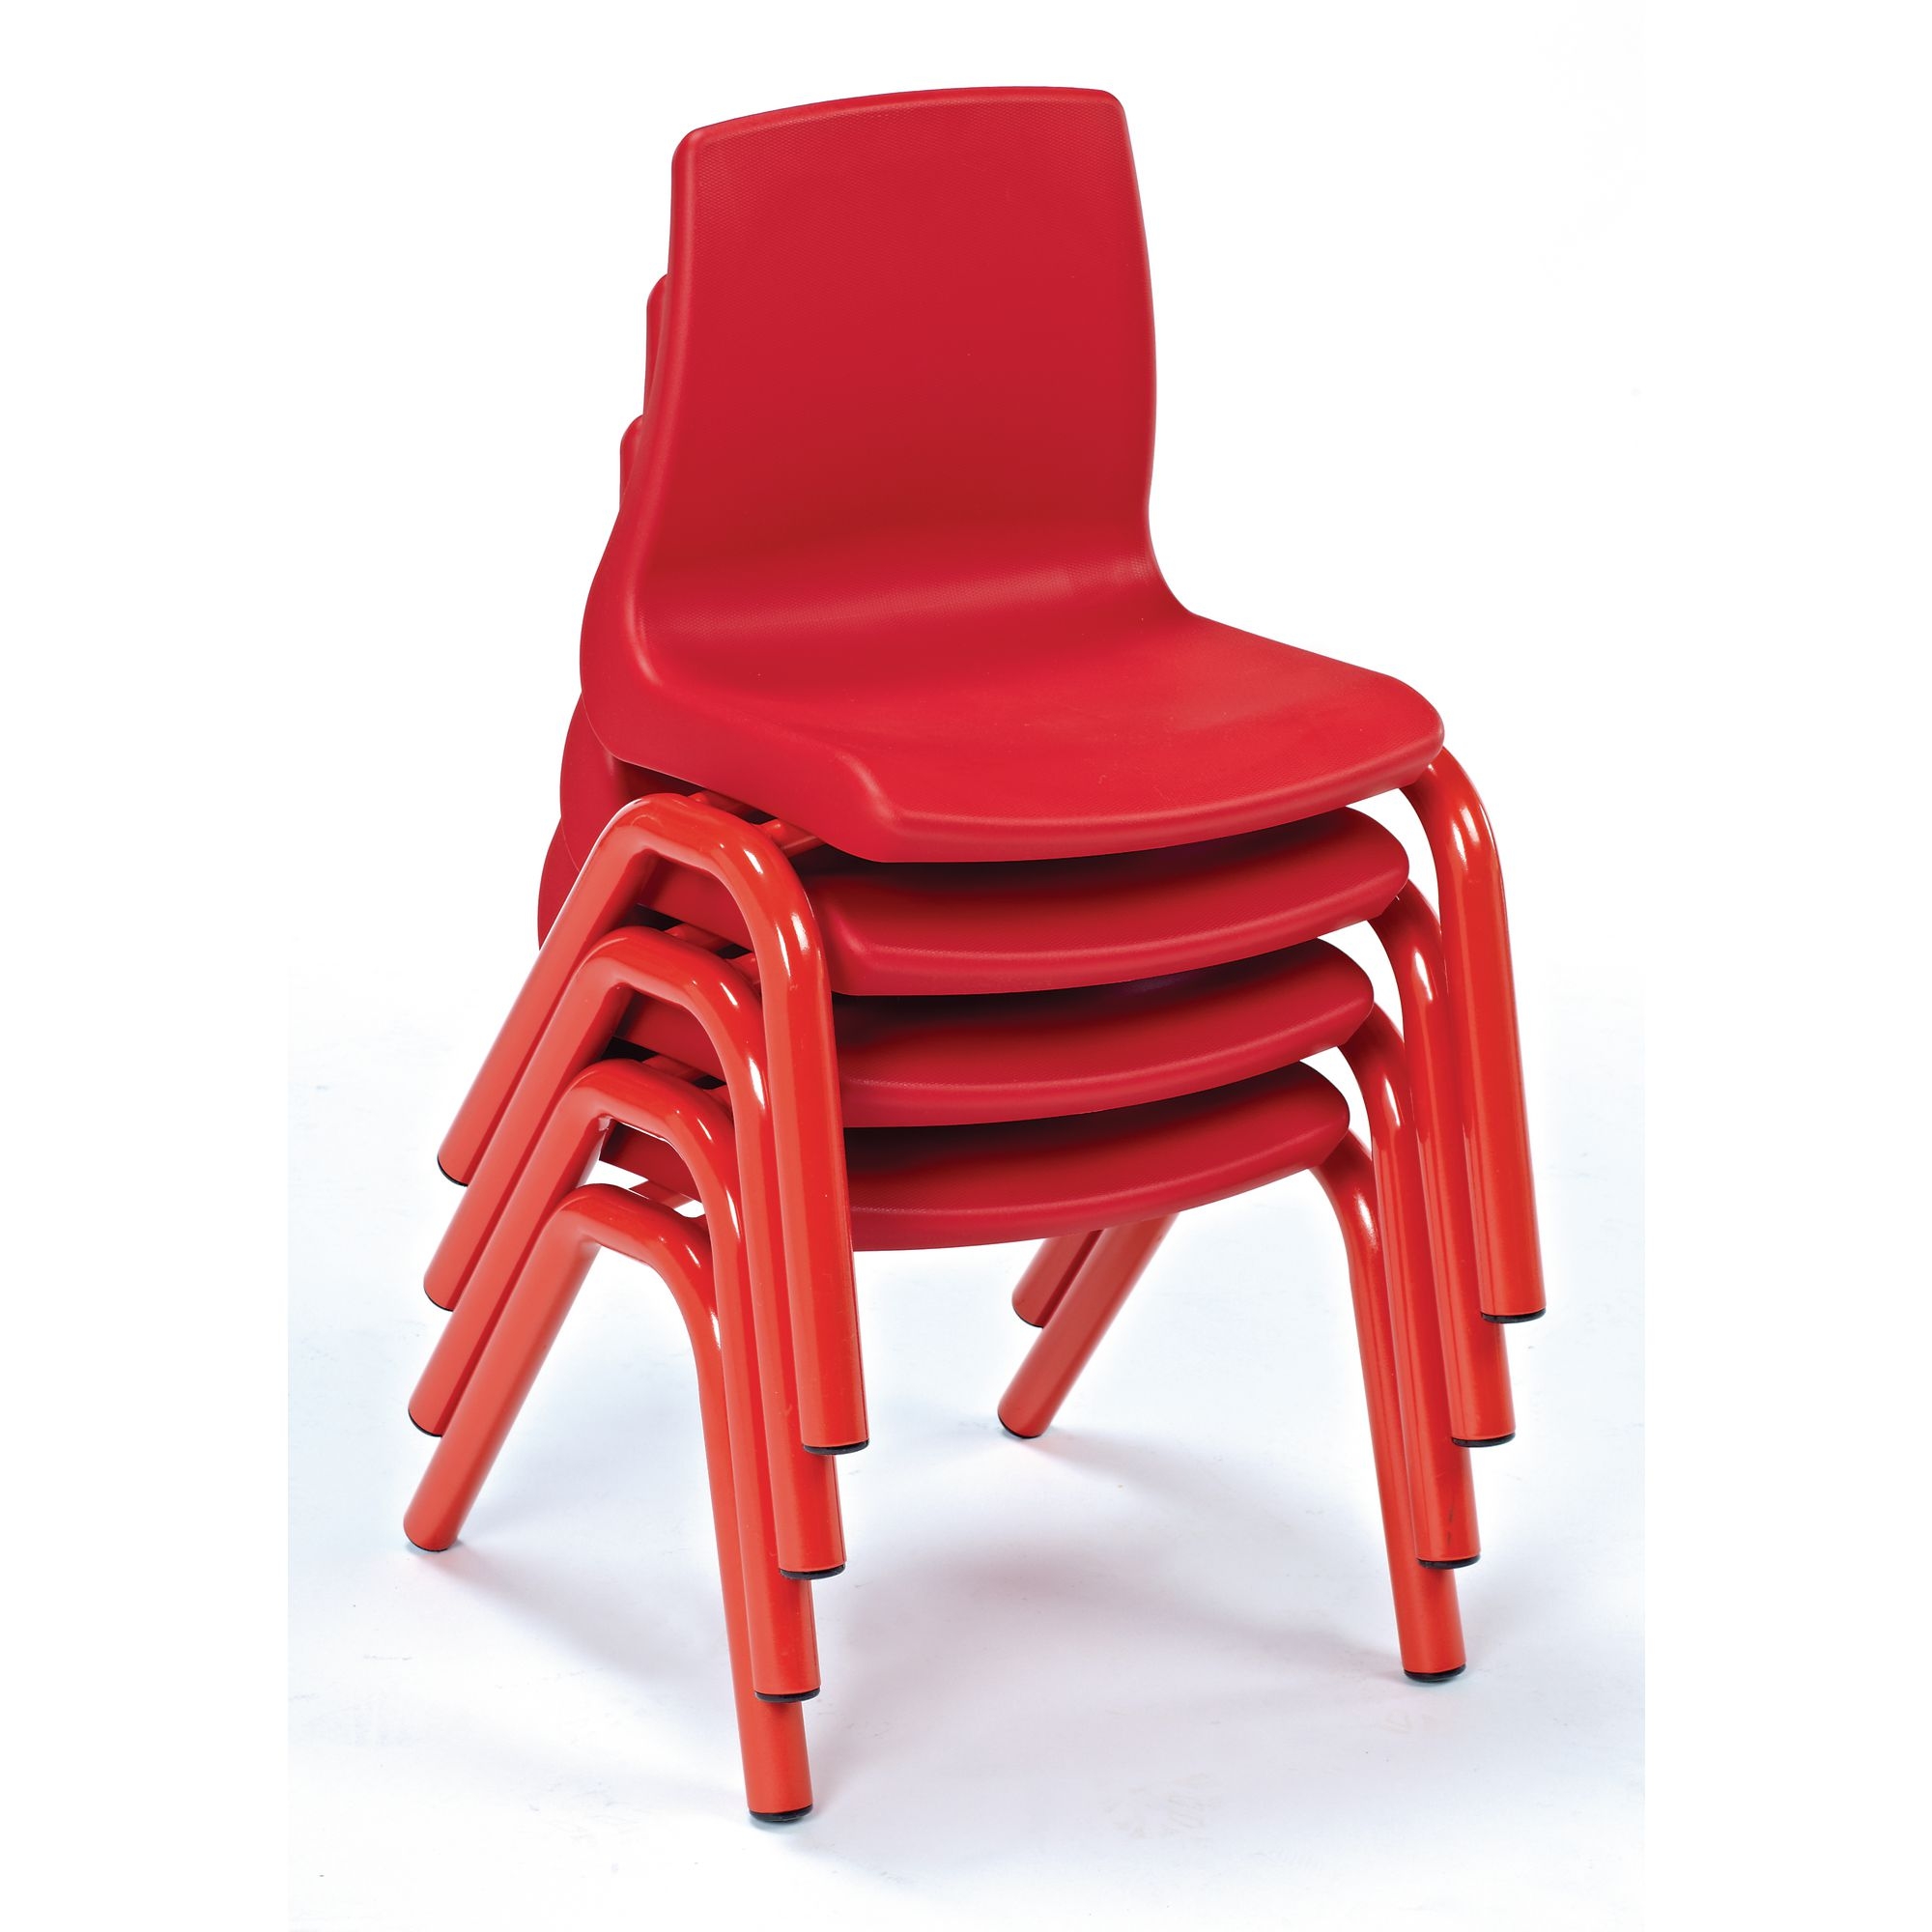 Harlequin Chairs - Size C - Seat height: 350mm - Tangy Lime